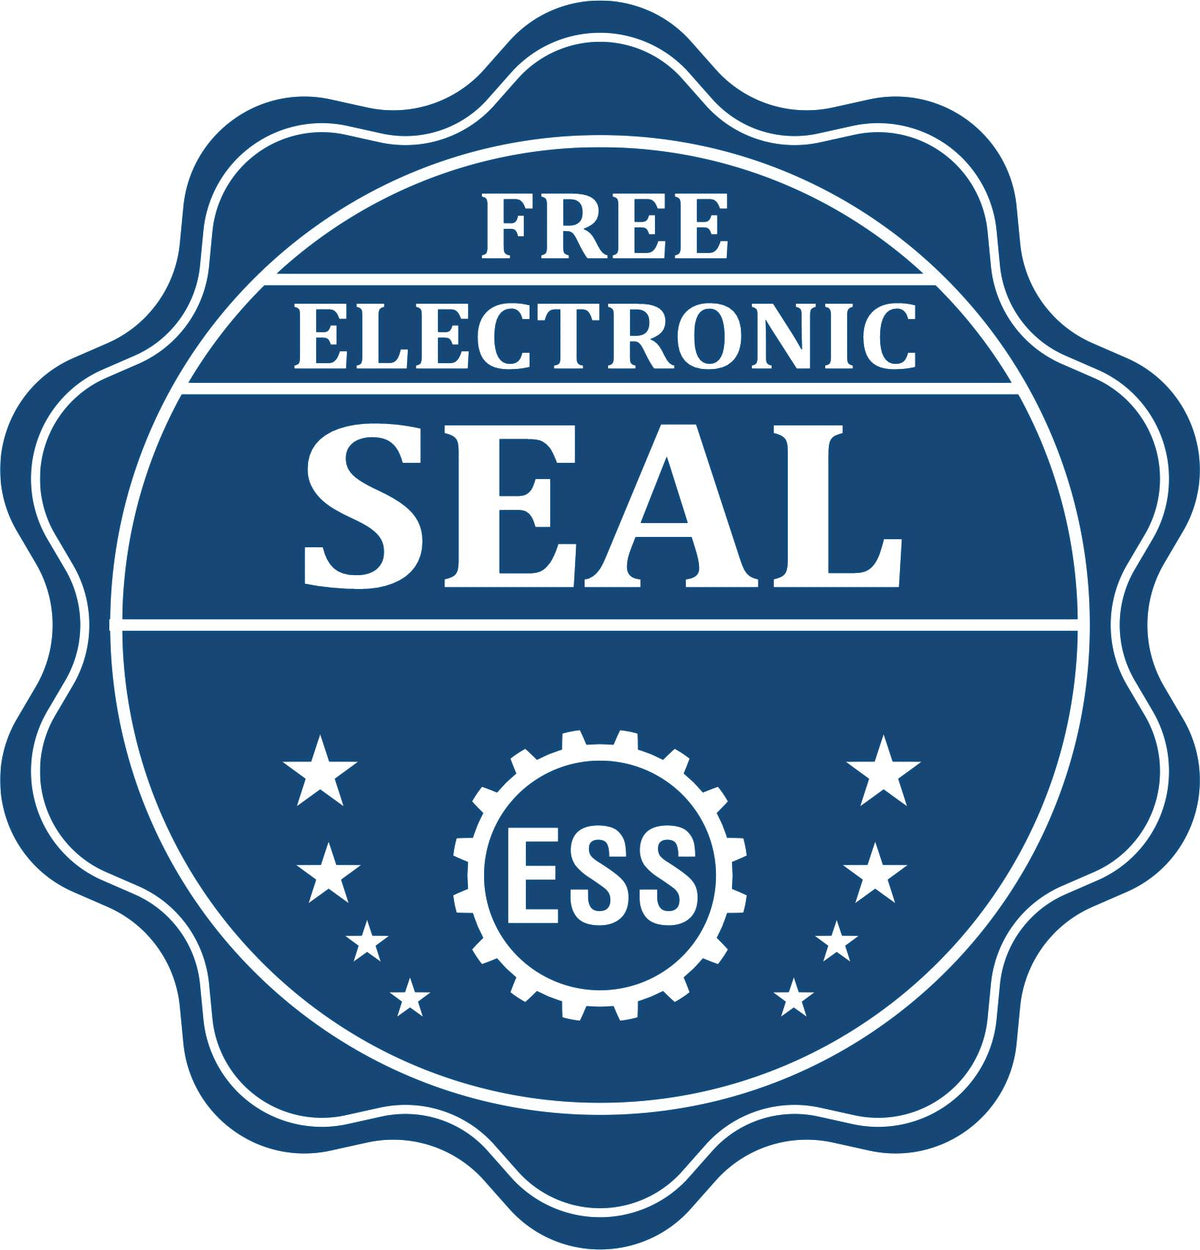 A badge showing a free electronic seal for the Handheld Guam Professional Geologist Embosser with stars and the ESS gear on the emblem.